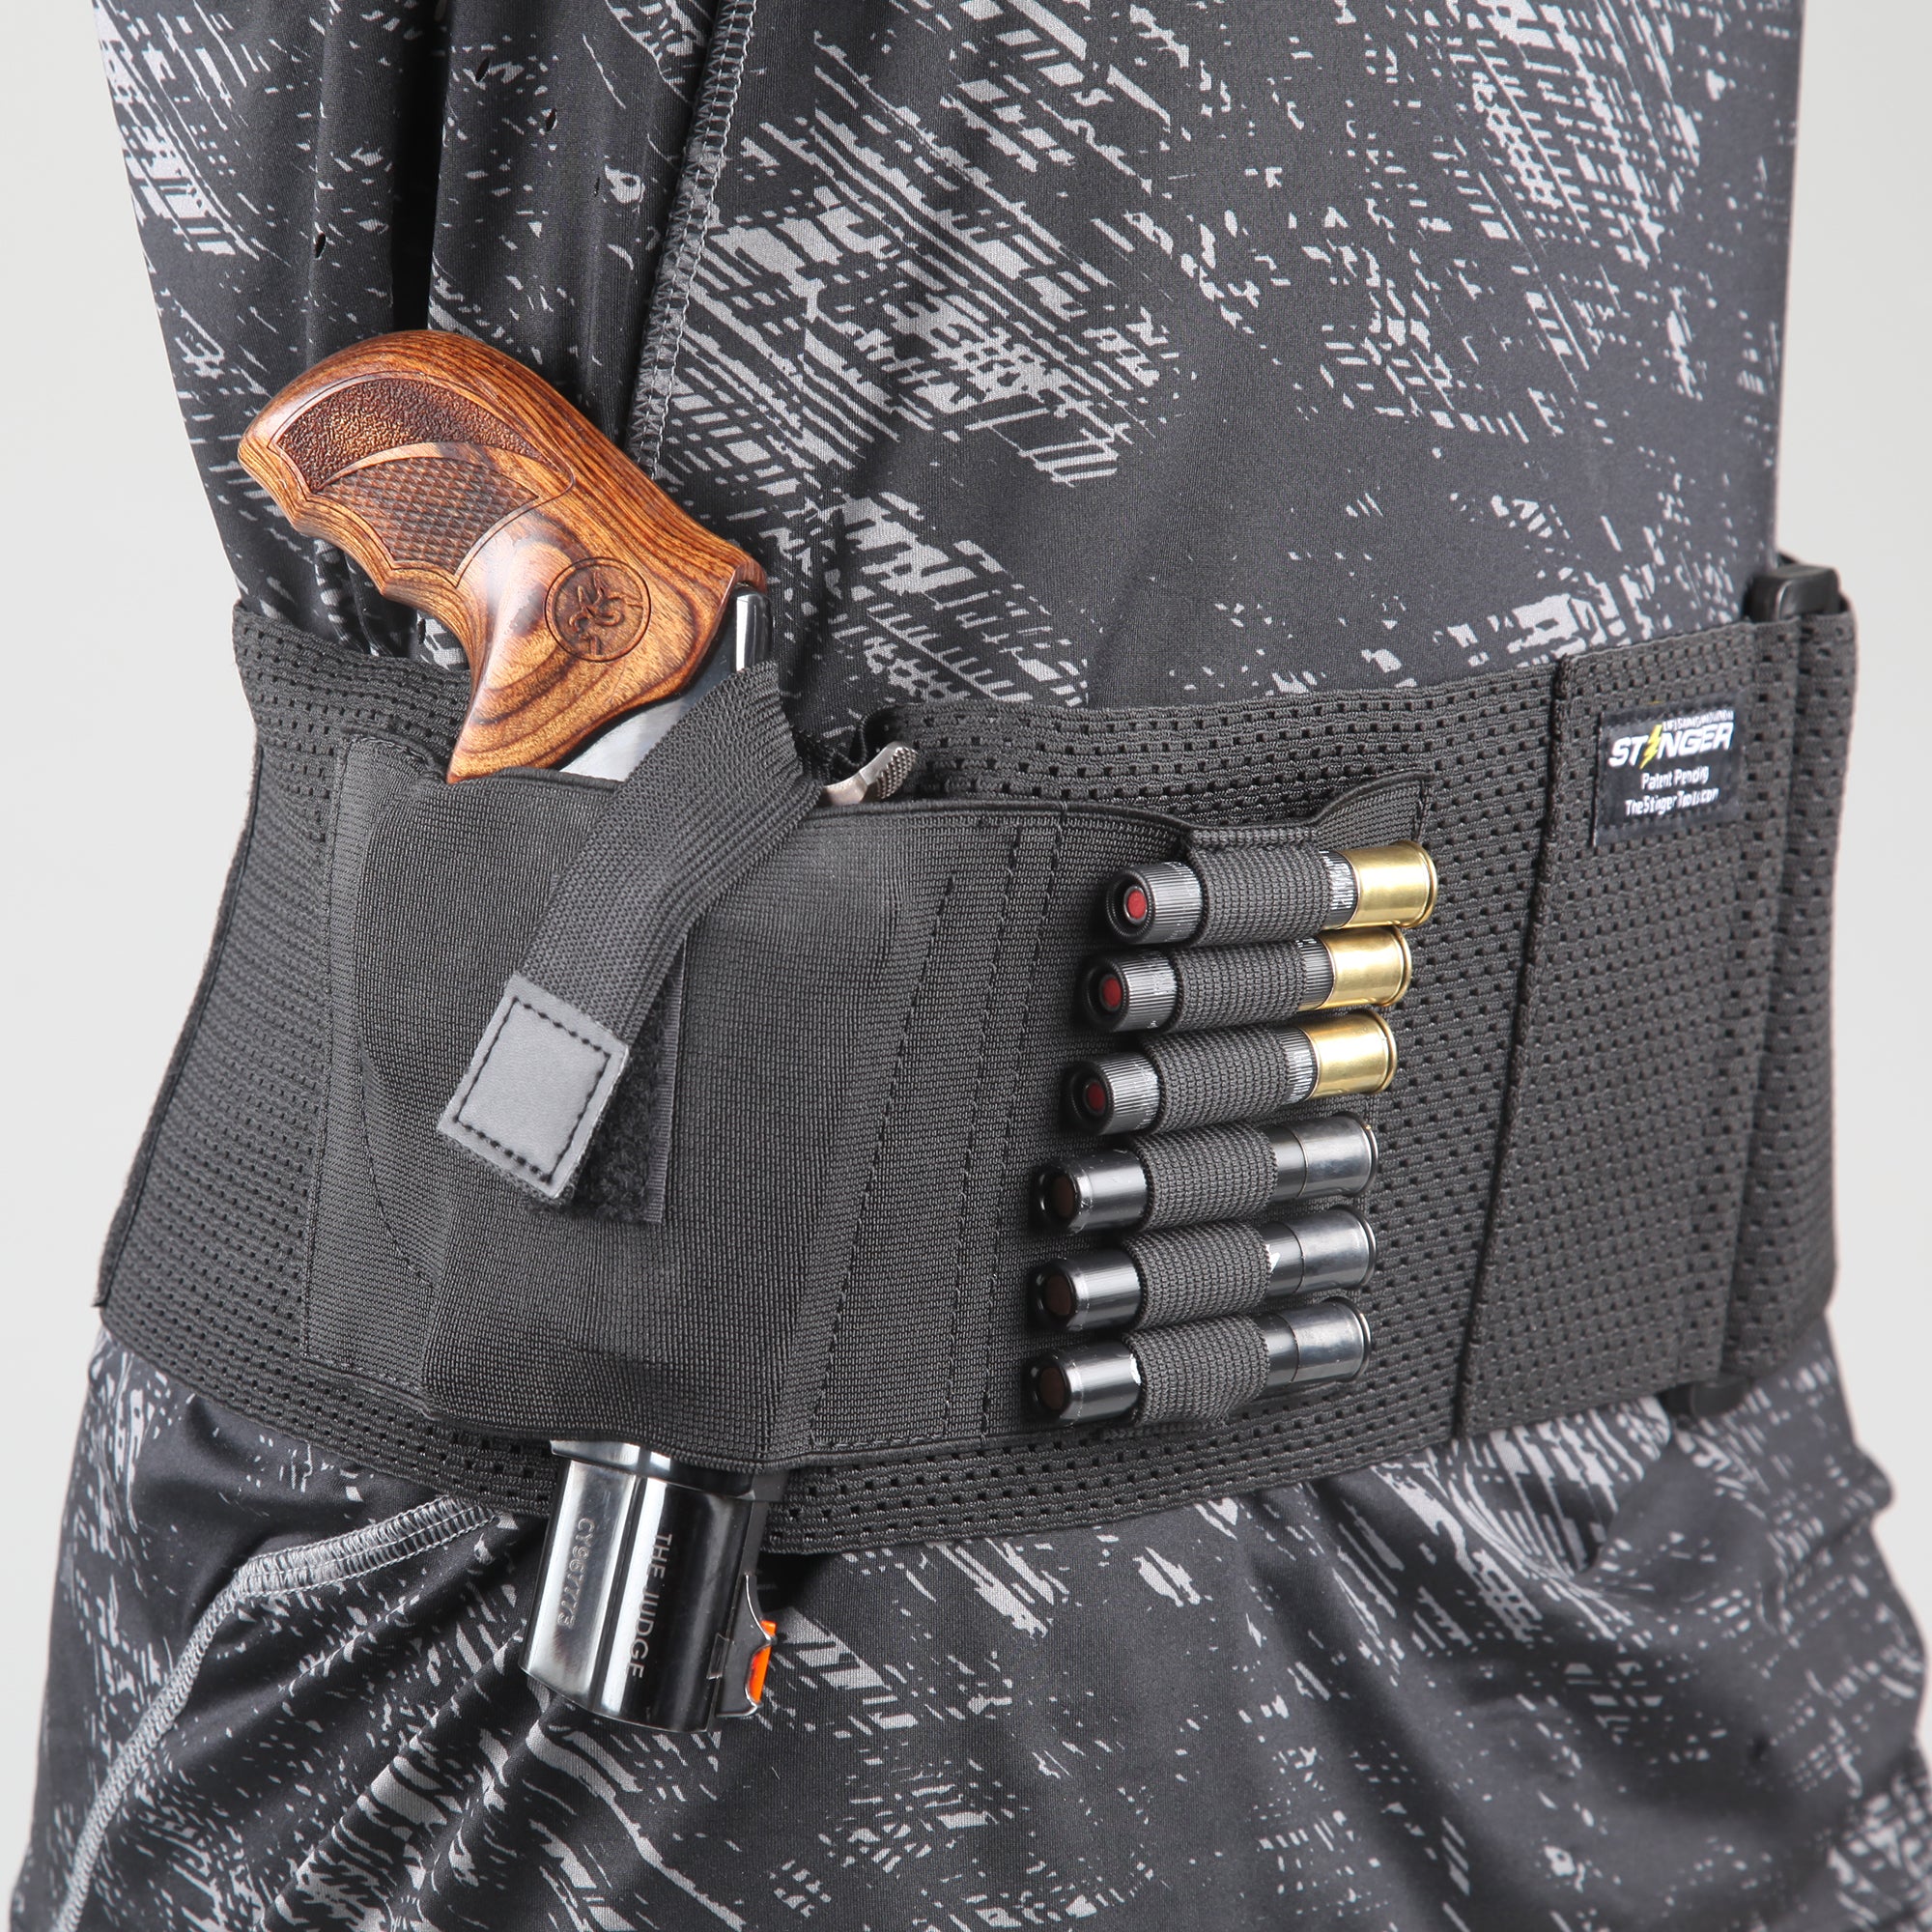 Tactical Belly Band Holster Concealed Hand Gun Carry Pistol Waist